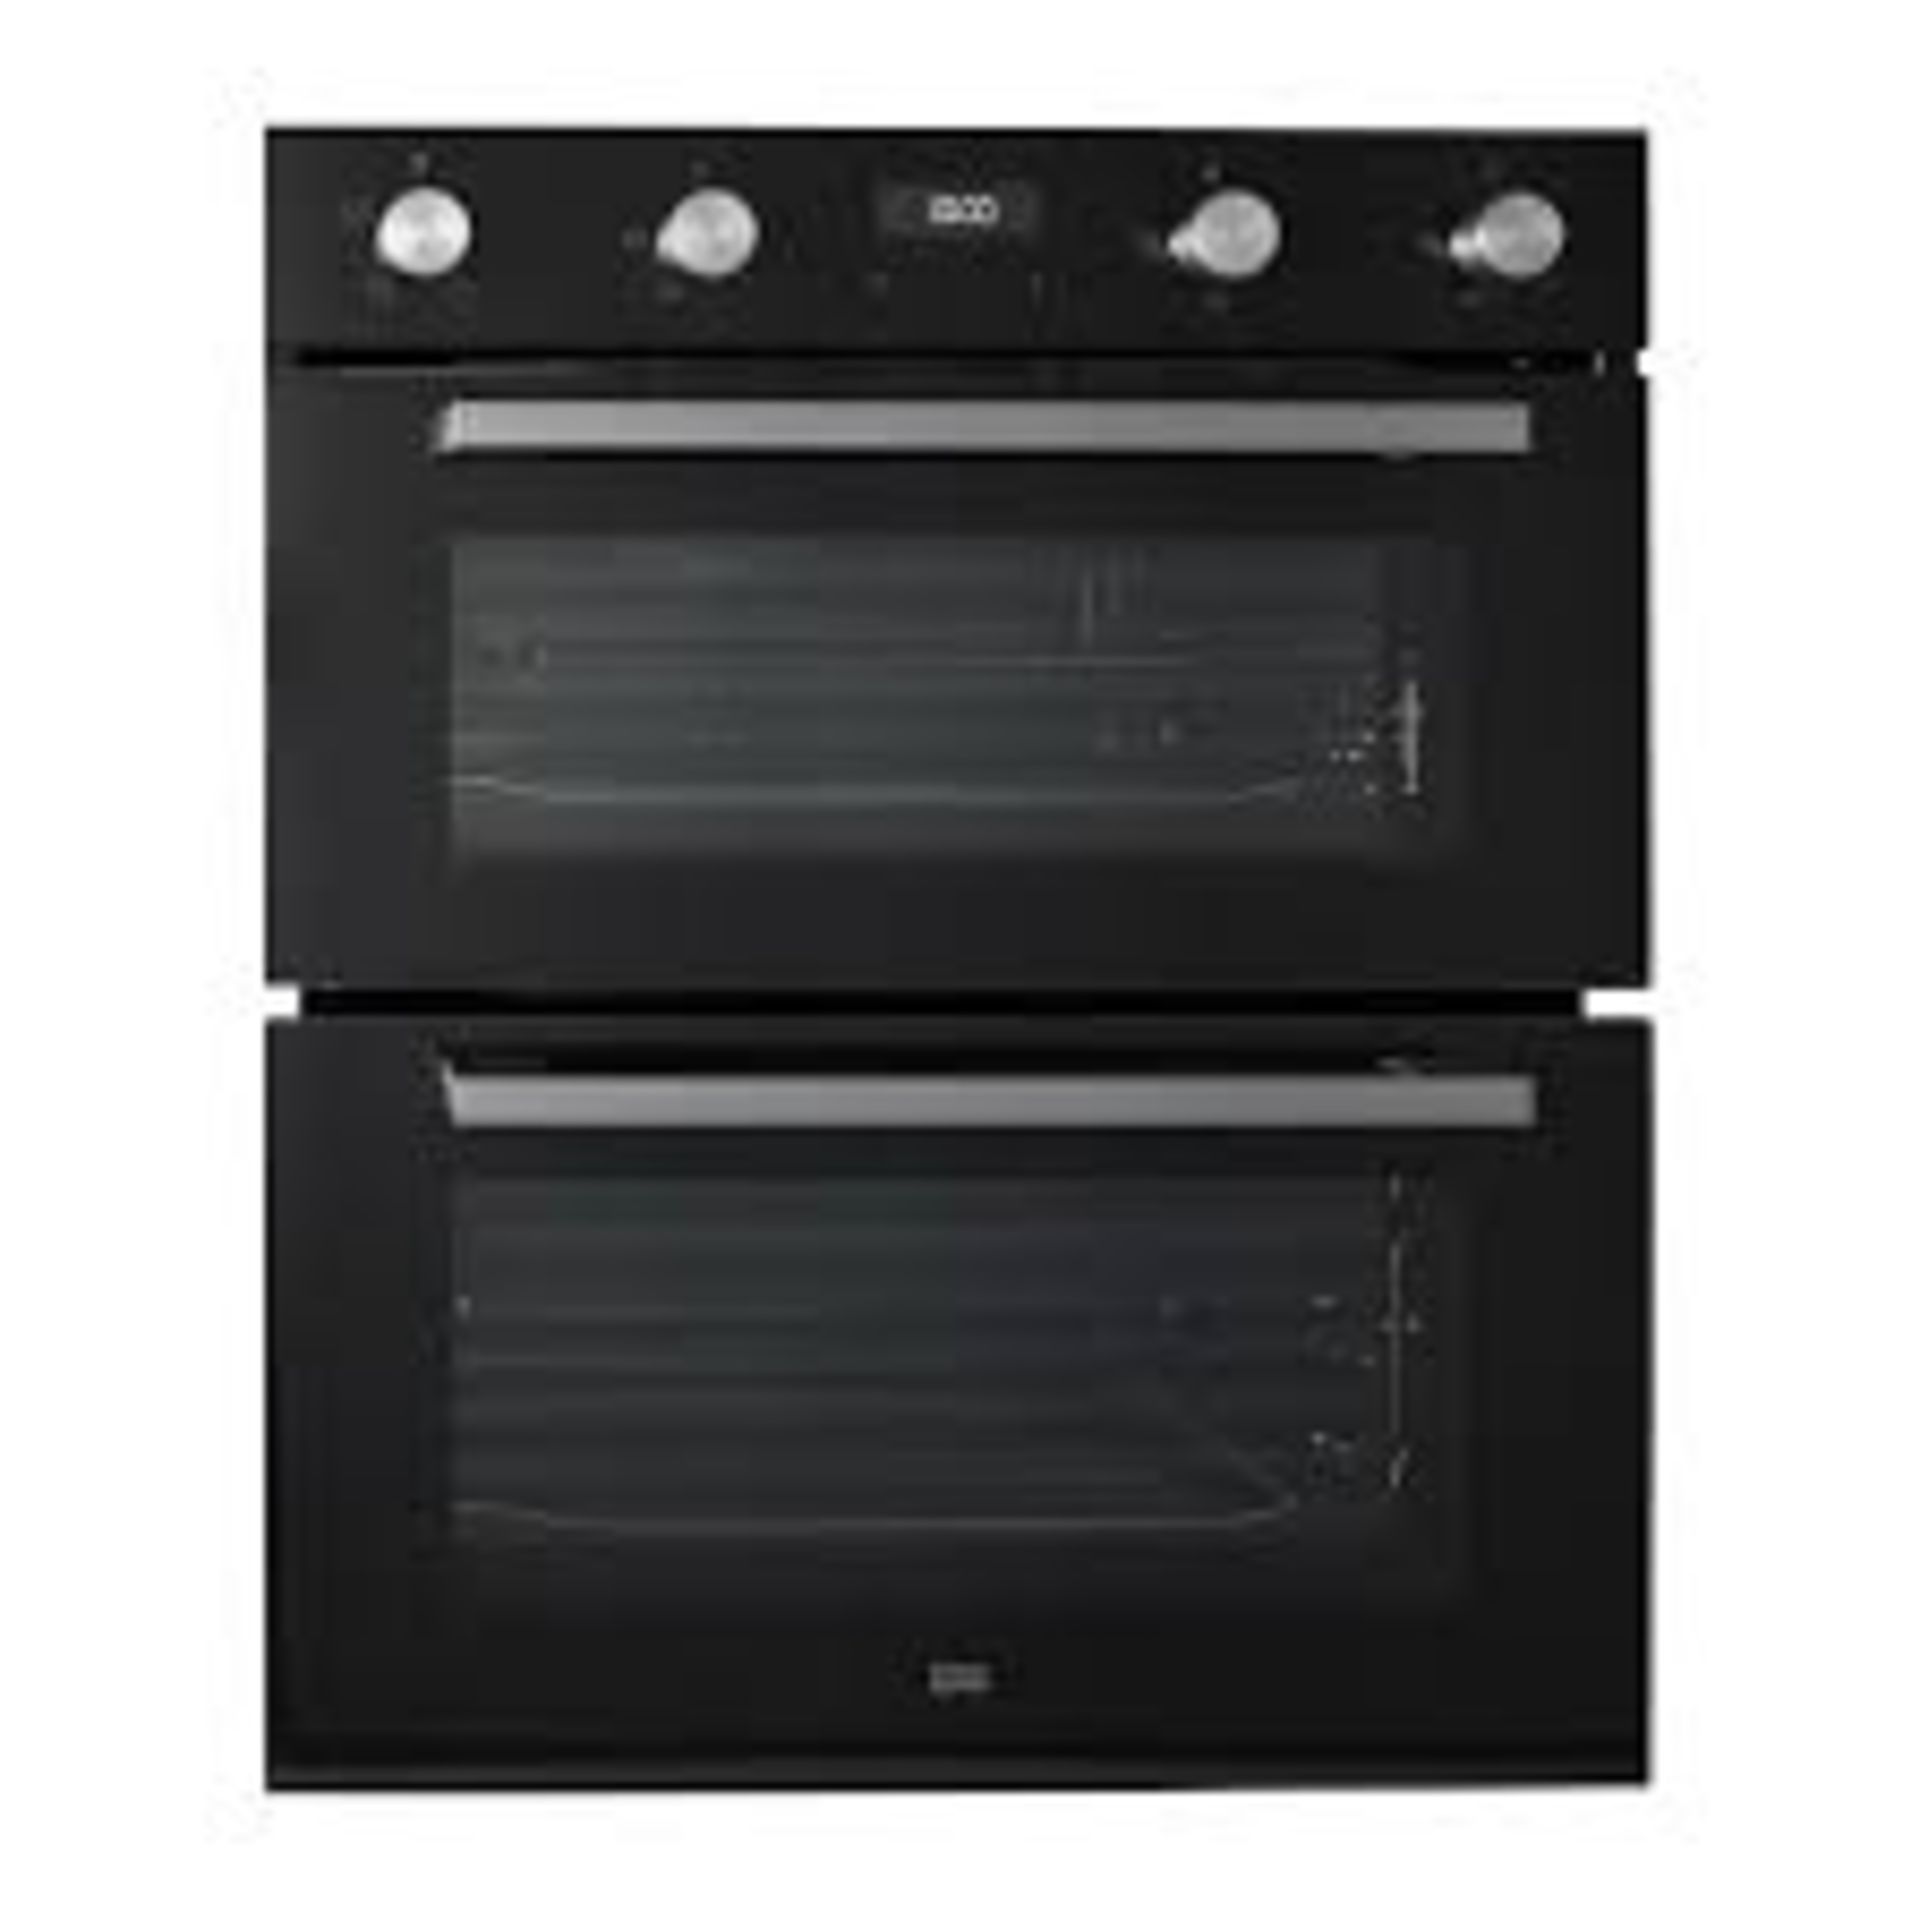 Cooke & Lewis CLBUDO89 Built-in Double oven - Black. - BI. RRP £498.00. Enjoy more room to cook with